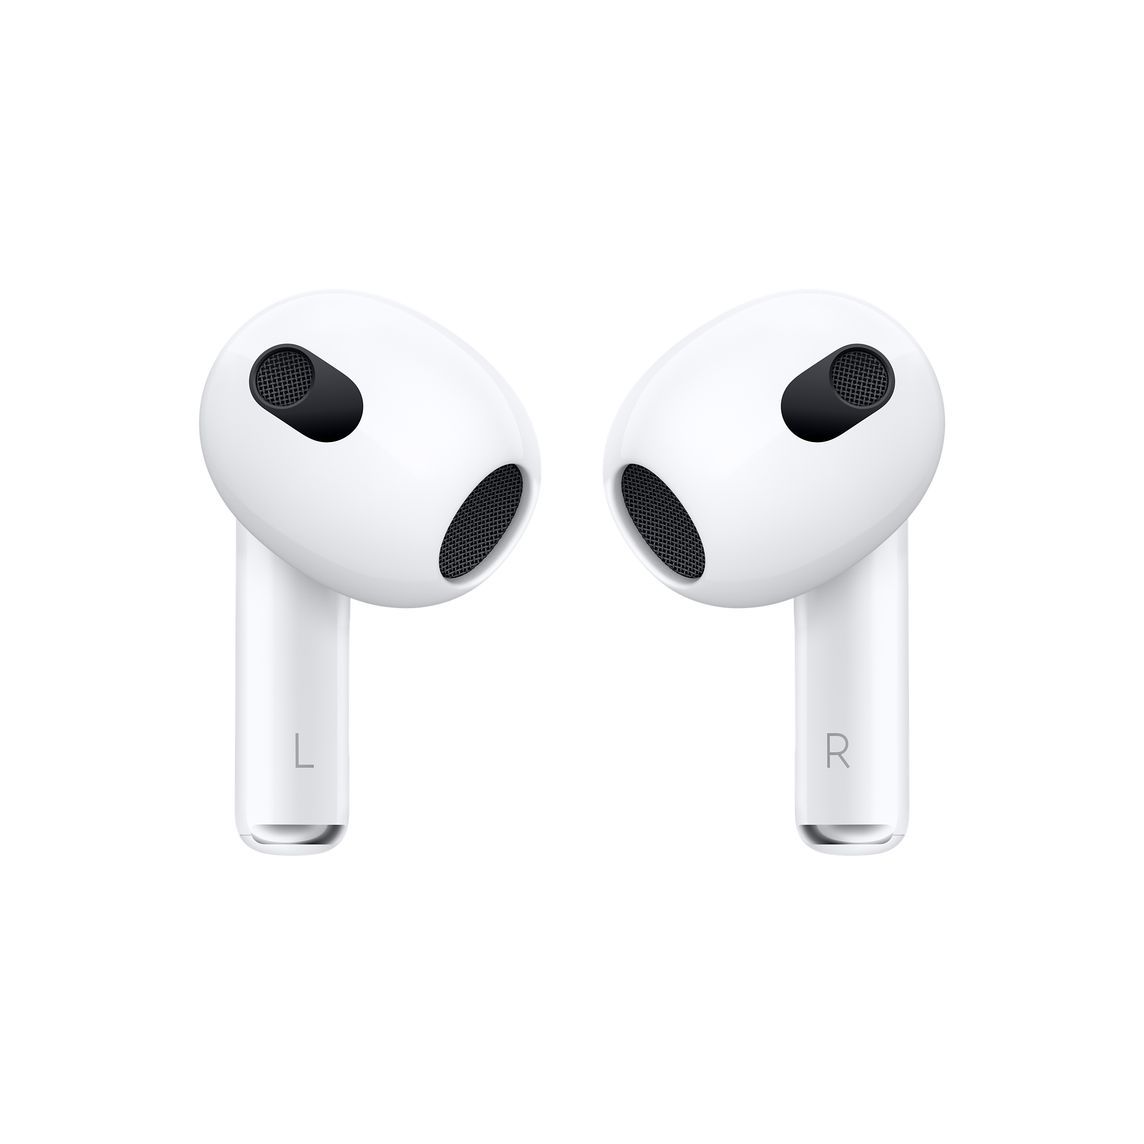 AirPods（第3世代） MME73J/Aの製品詳細・価格比較｜PayPayフリマ